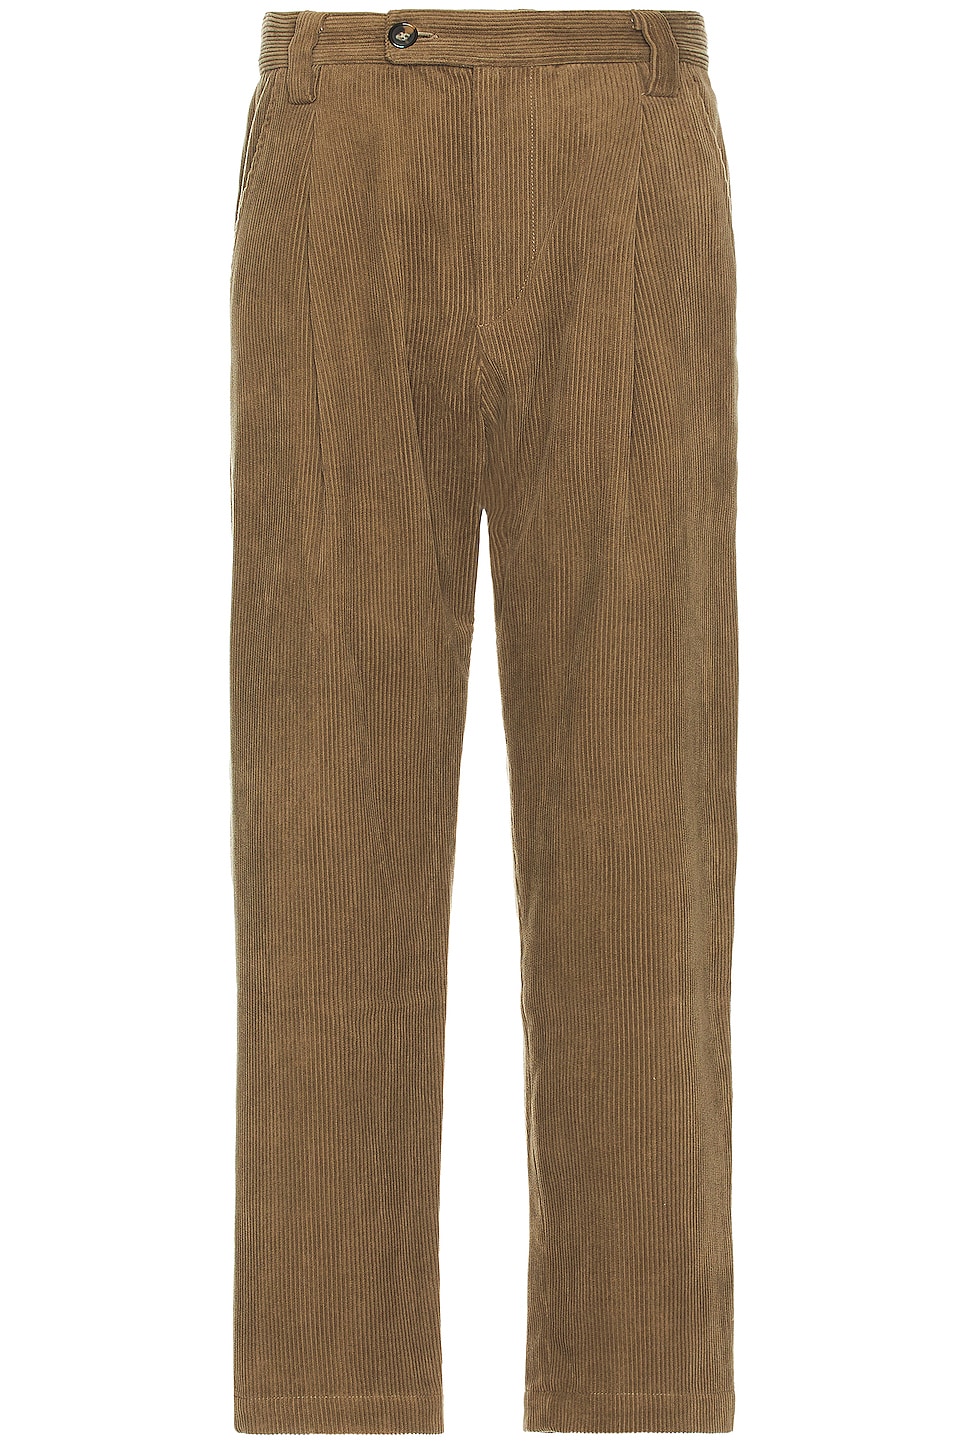 Image 1 of A.P.C. Pant in Taupe